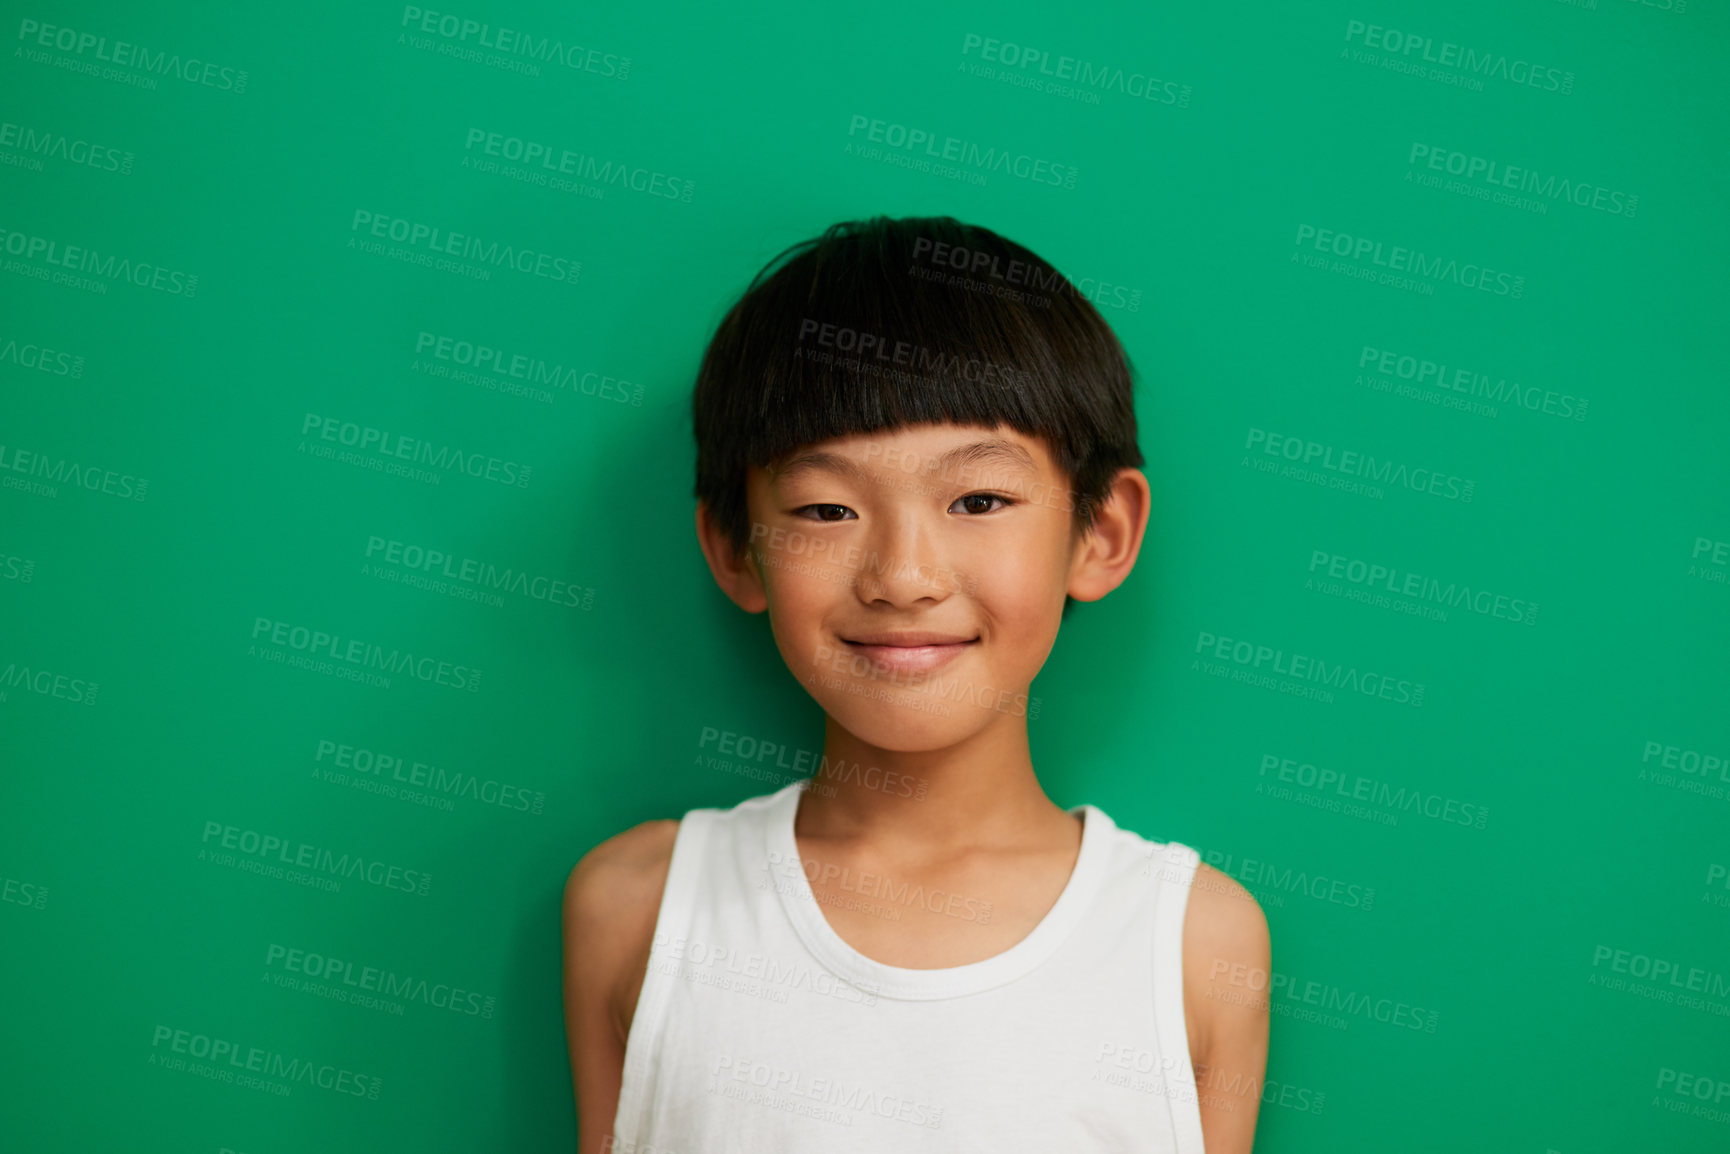 Buy stock photo Studio portrait of a cheerful little boy standing against a green background during the day